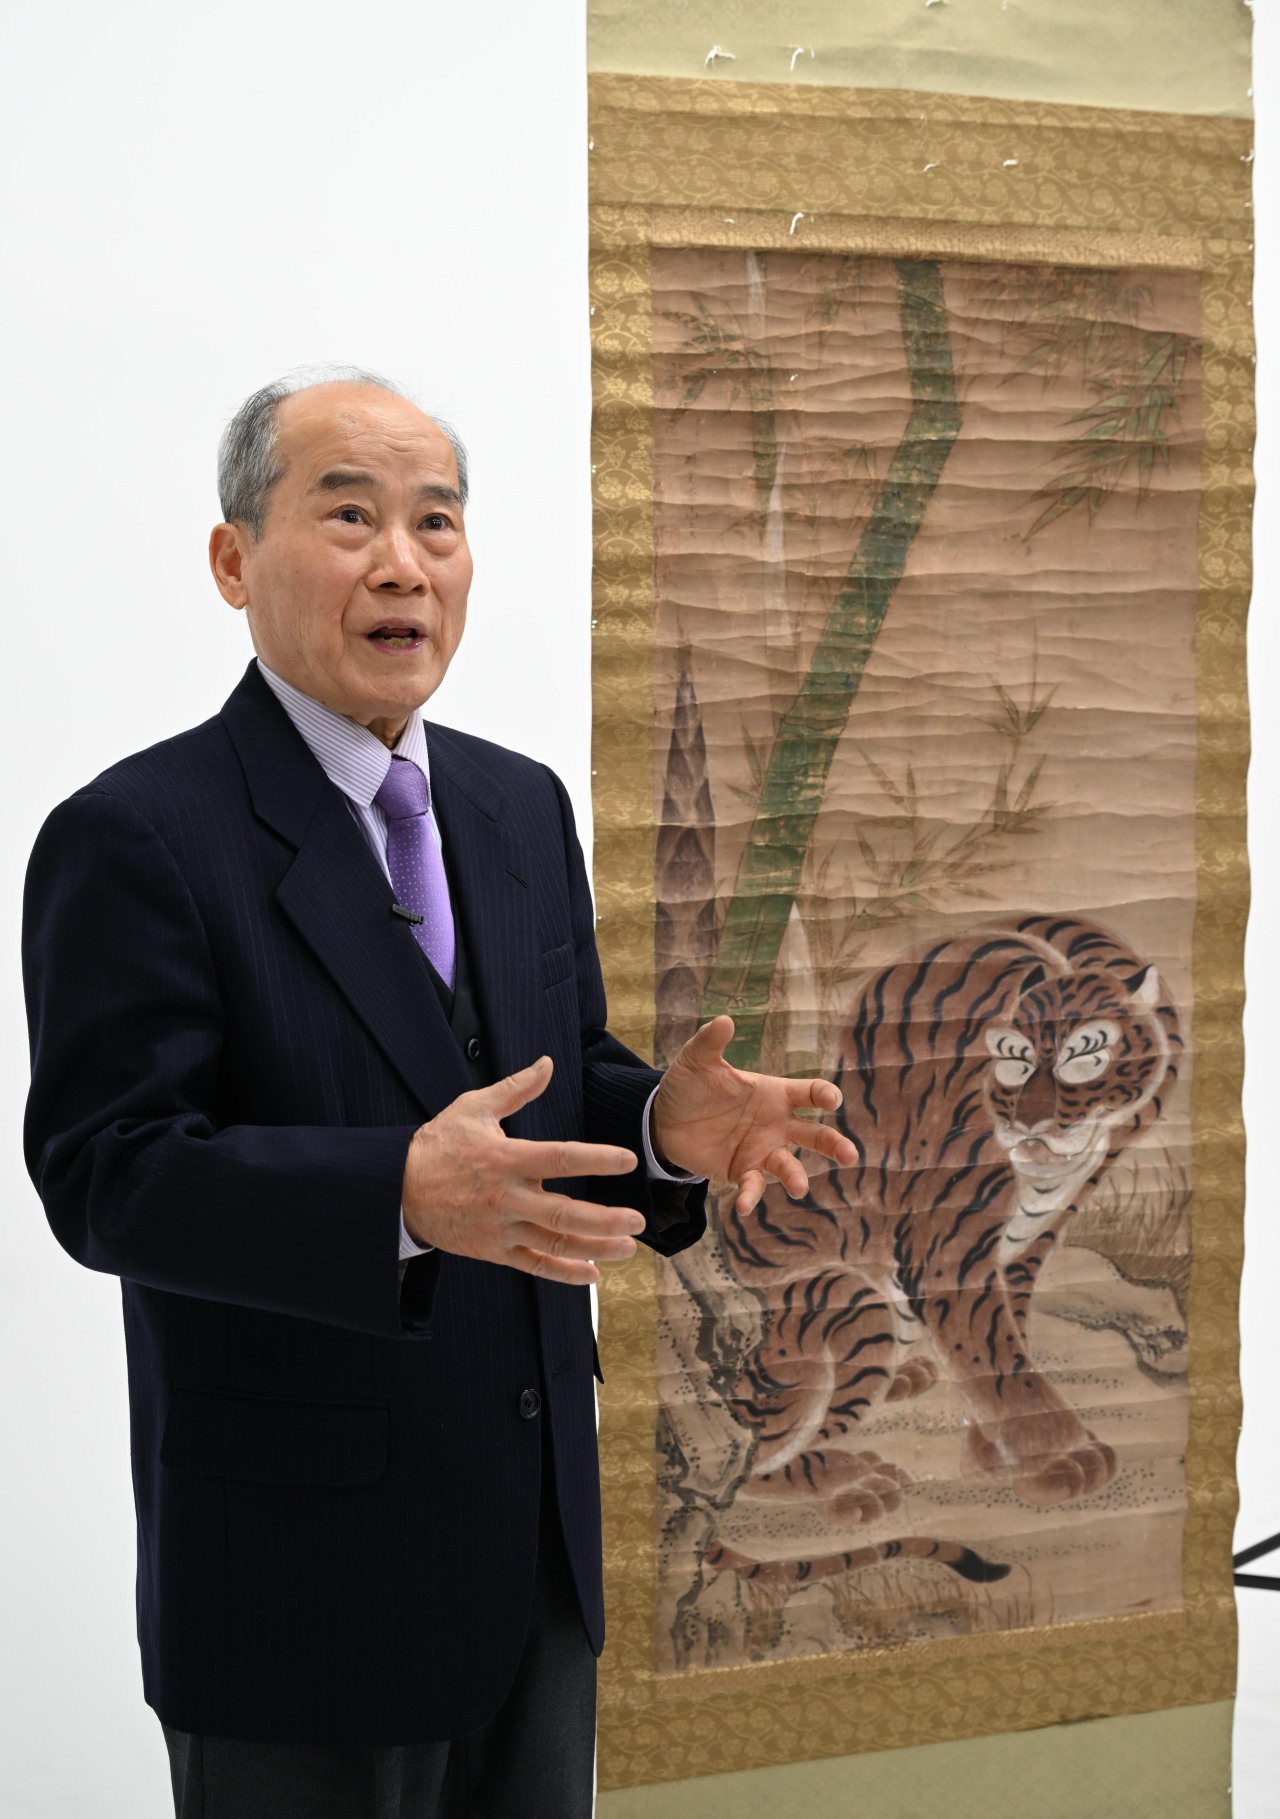 “Painting of Intrepidity” by Lee San, whose pen name is Myeongdang, was unveiled by Lee Young-soo, an emeritus professor at Dankook University at Herald Square in Seoul on Wednesday.